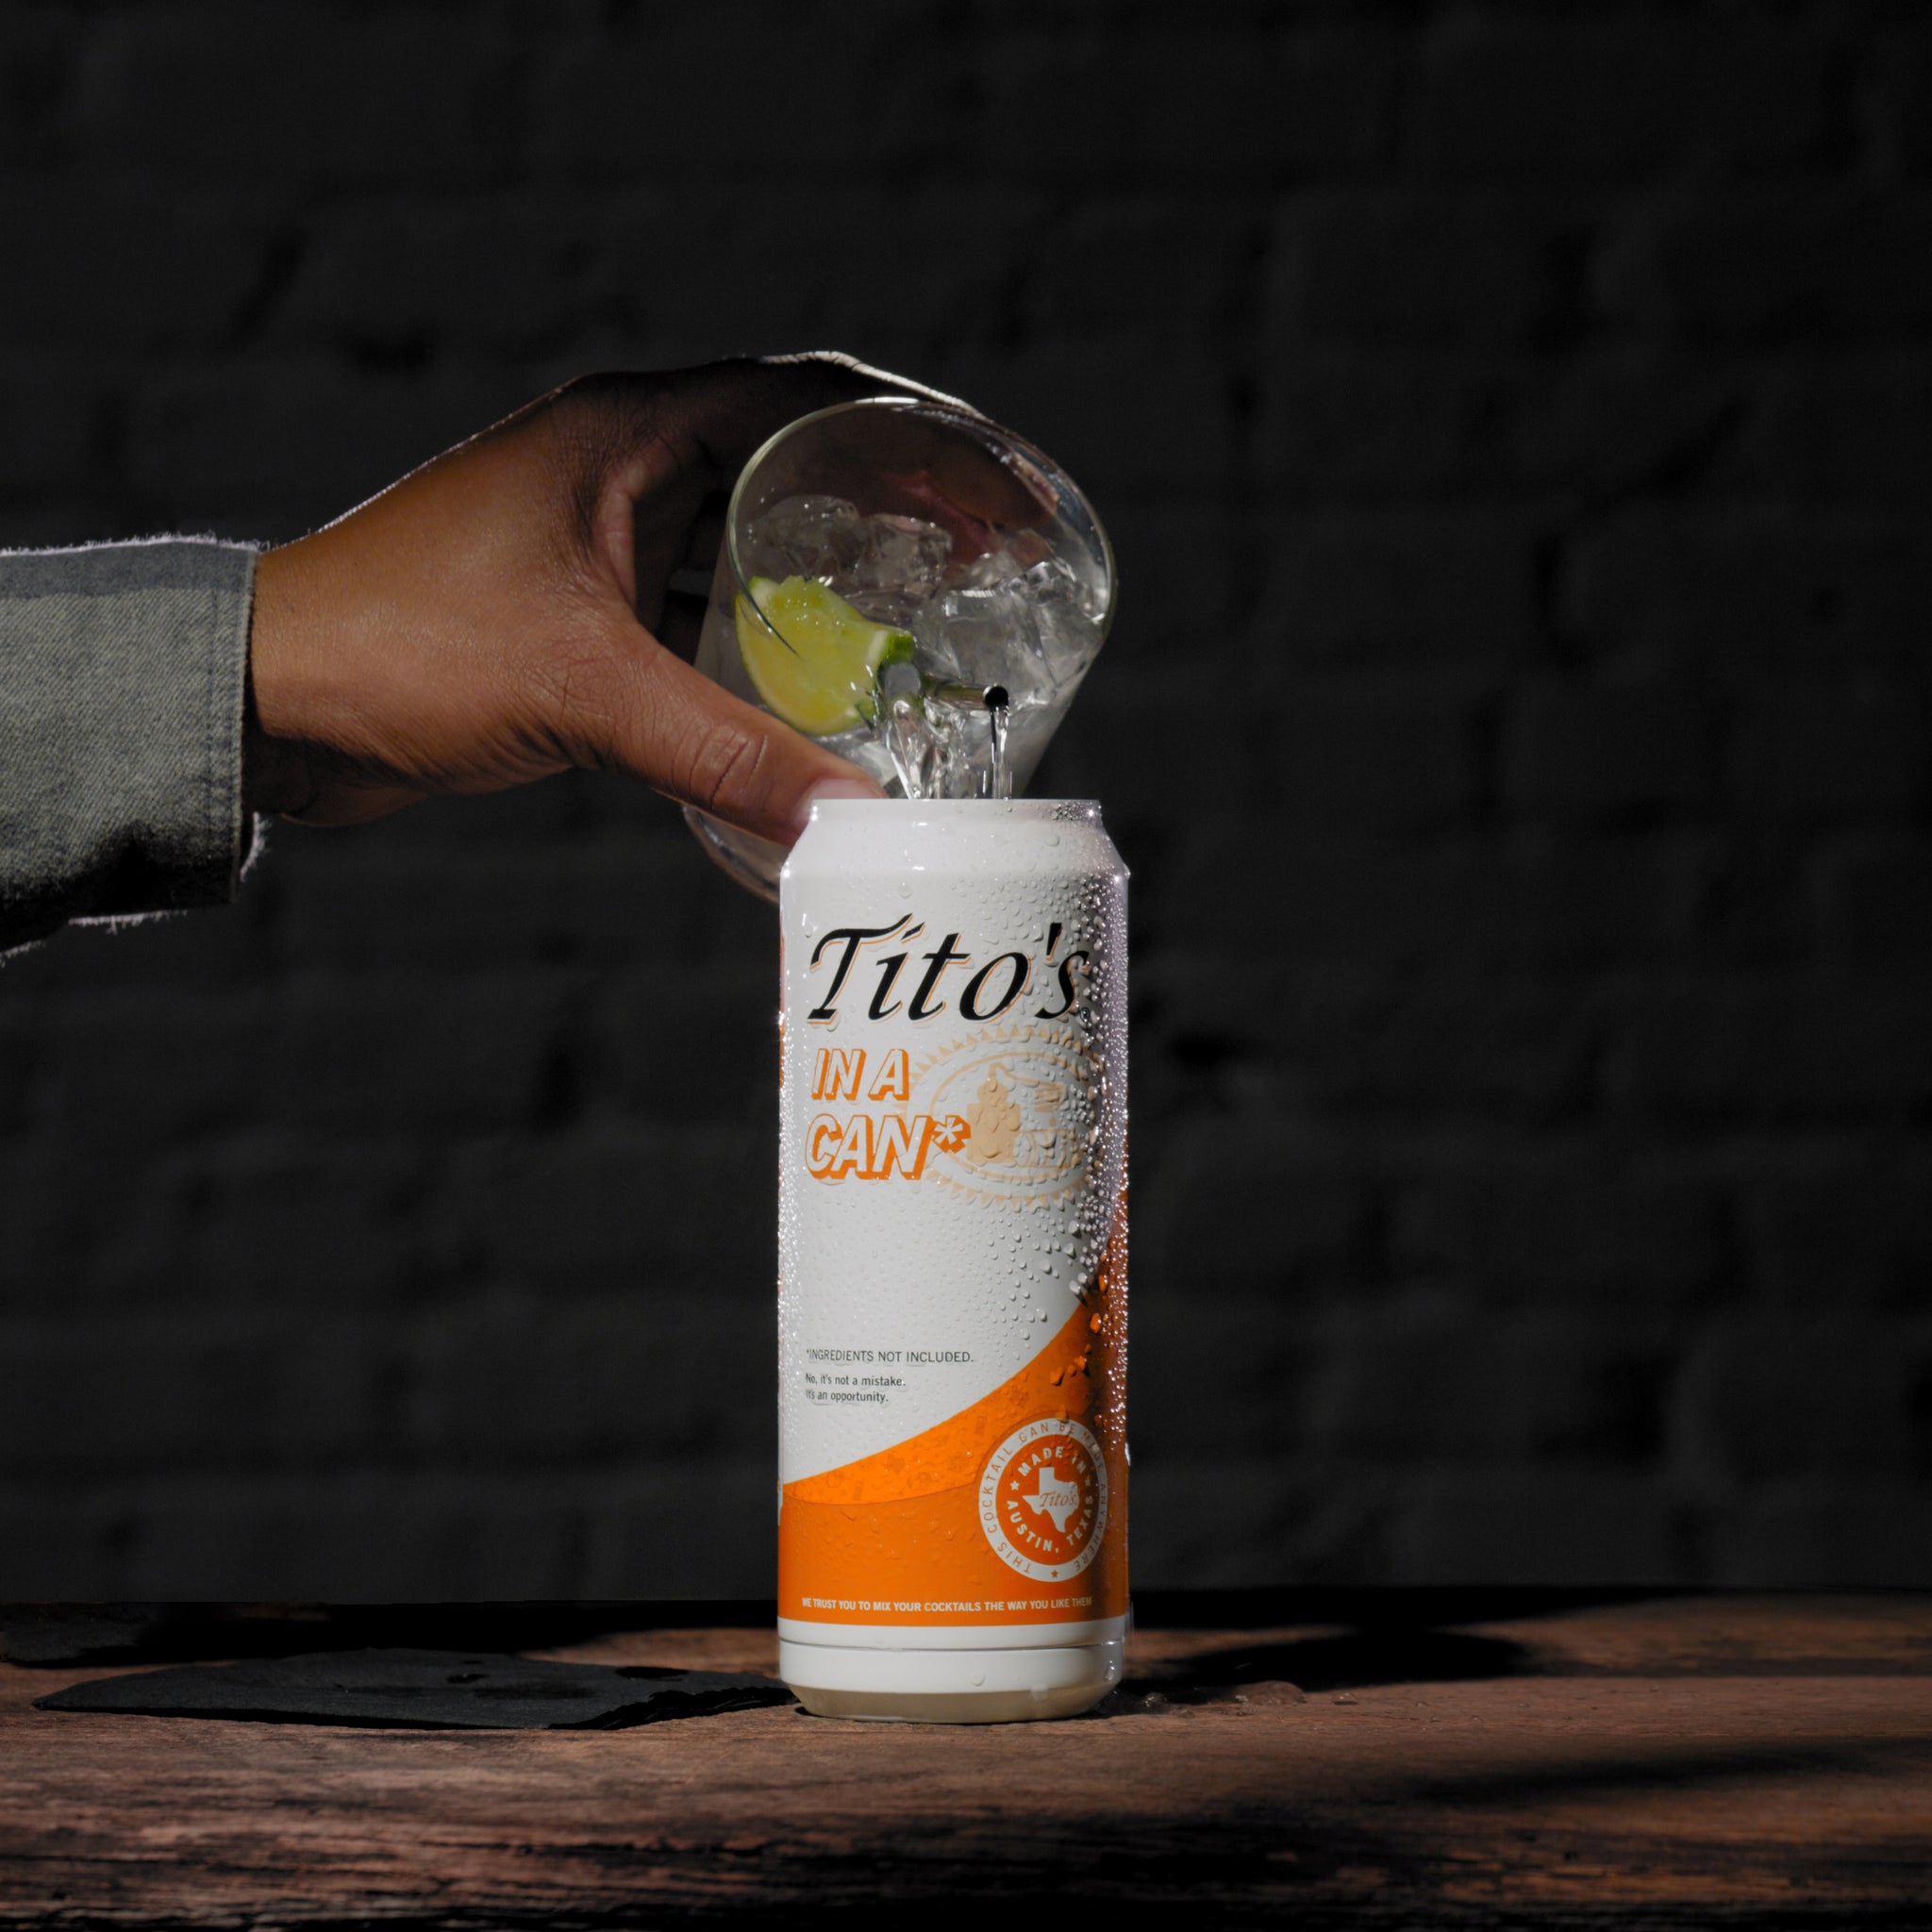 Hand pouring cocktail into orange and white stainless steel Tito's in a Can* tumbler